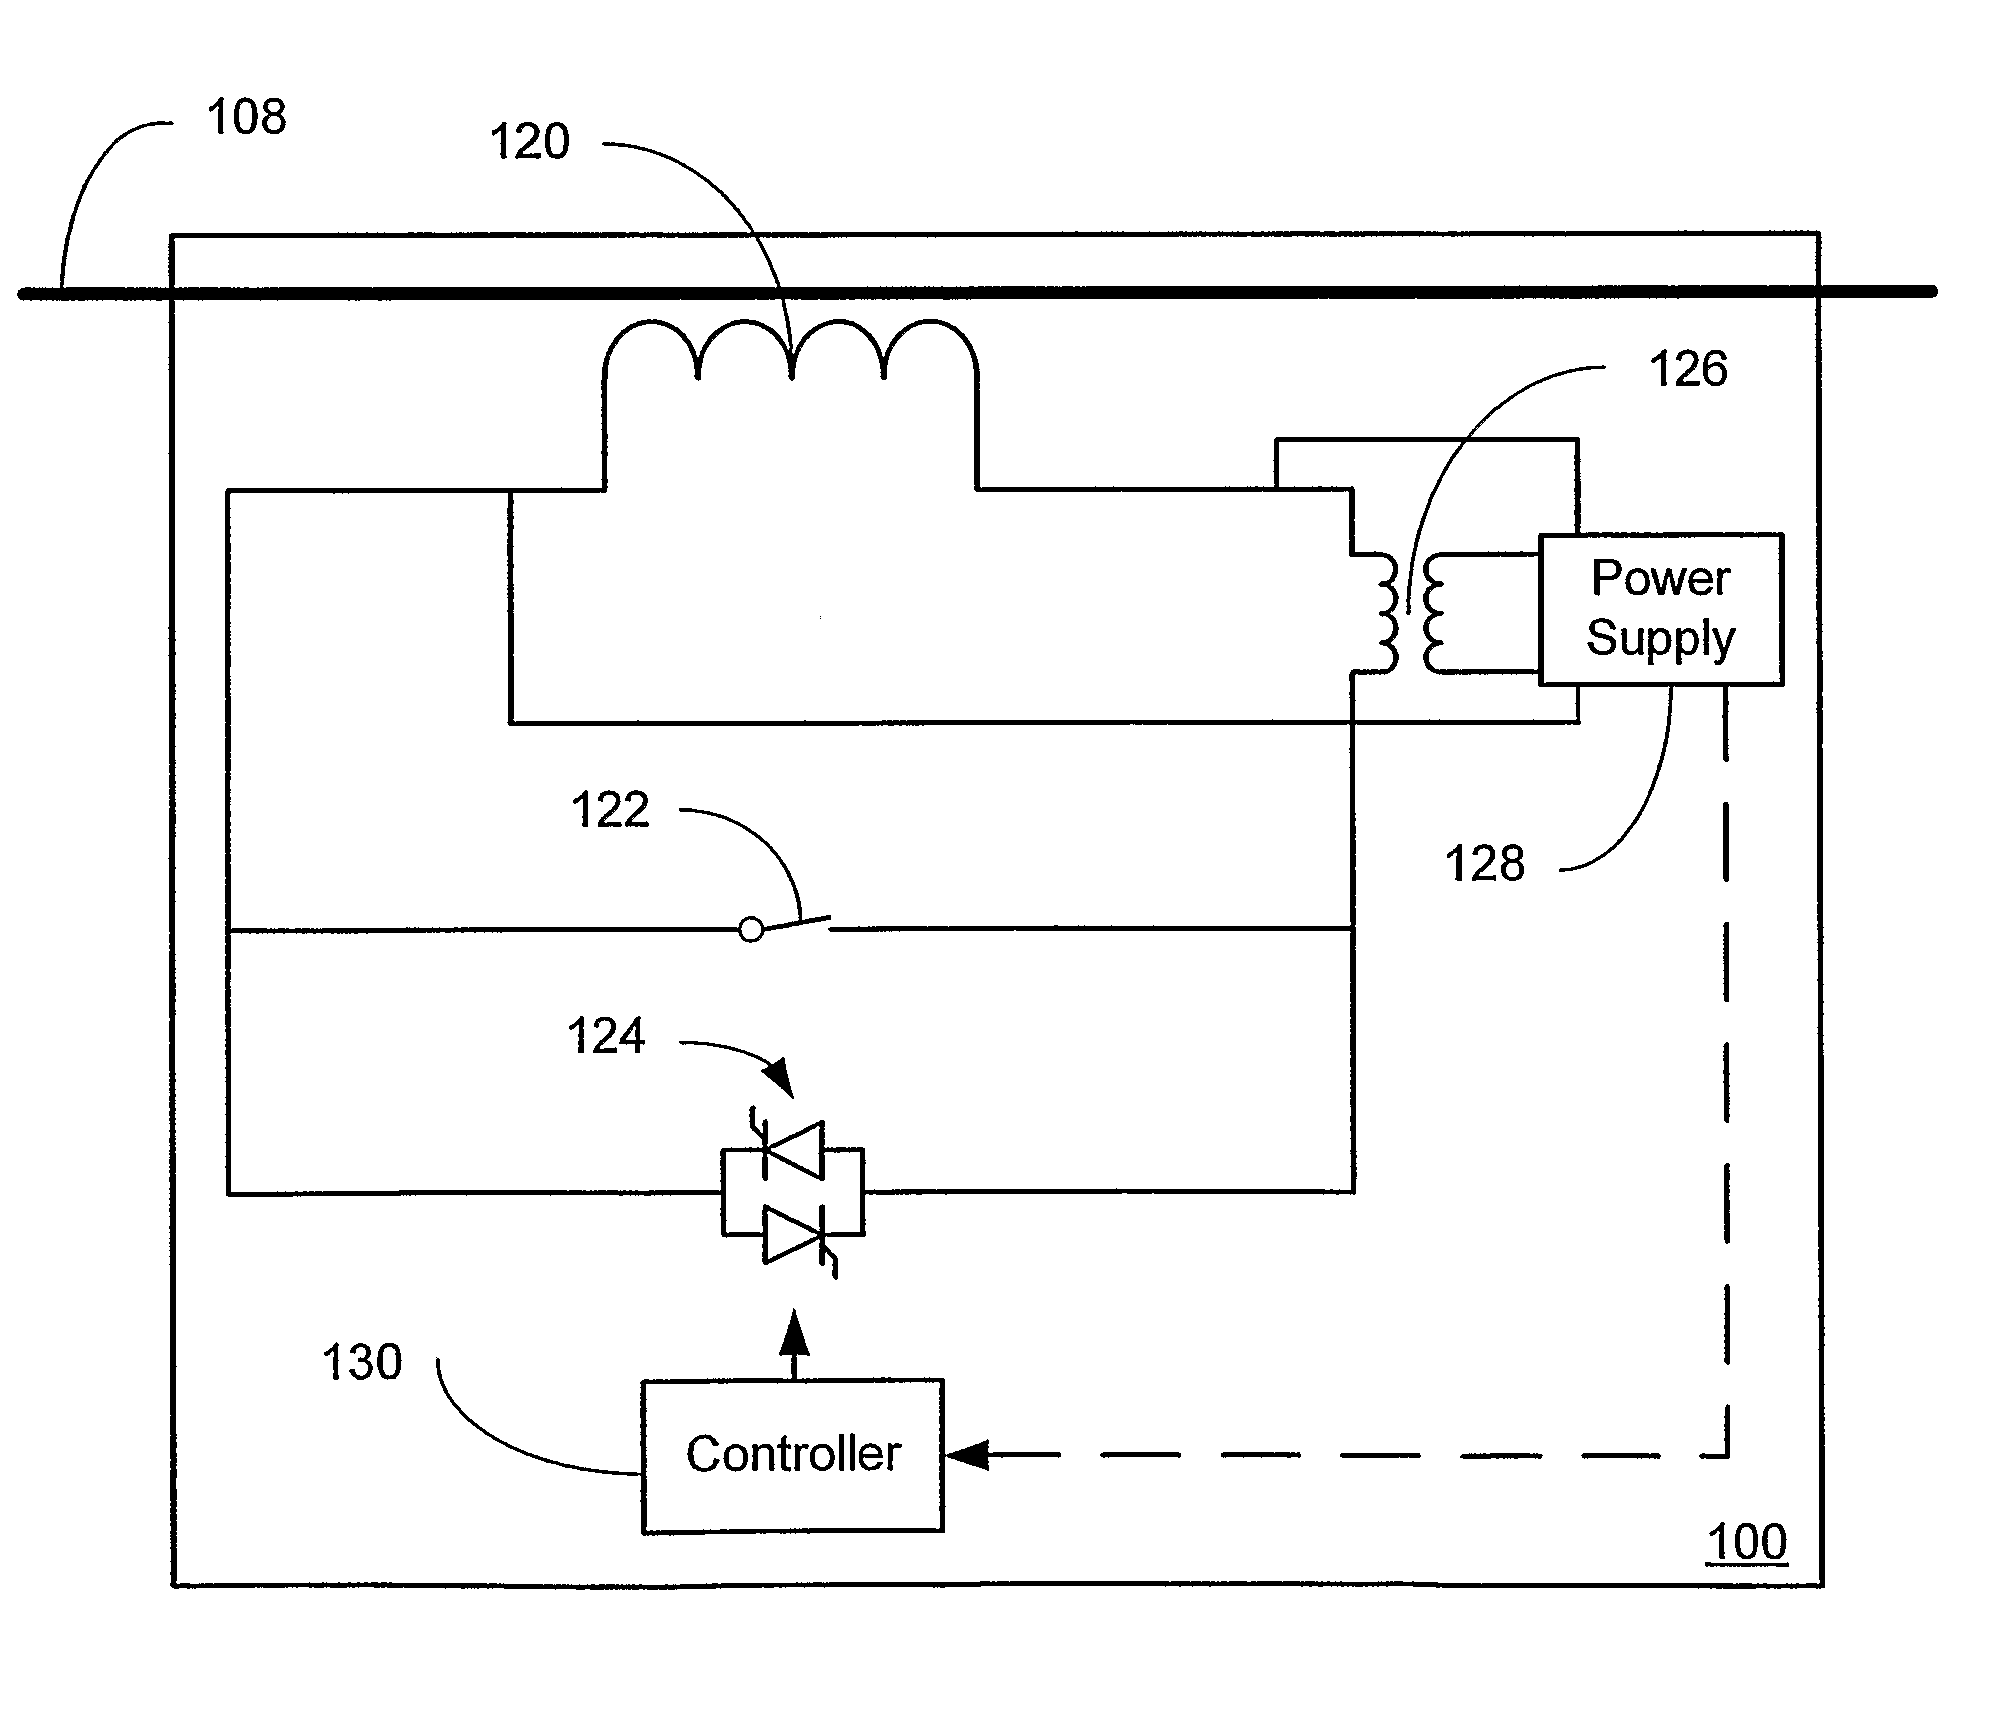 Systems and Methods for Distributed Series Compensation of Power Lines Using Passive Devices